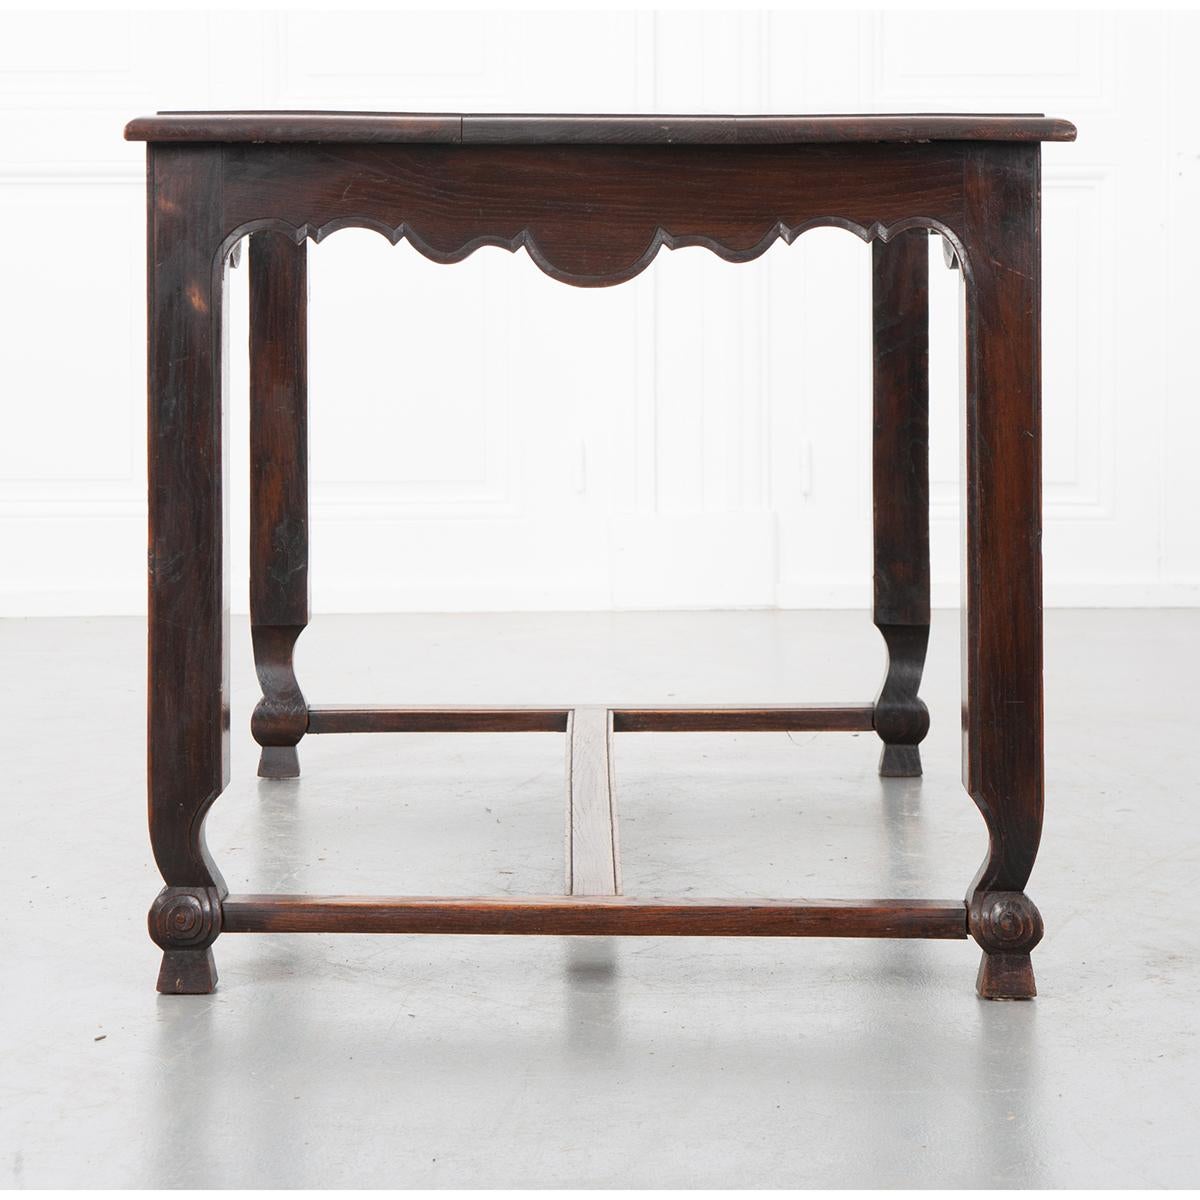 This unique oak writing desk, c. 1890, is simply gorgeous. The three plank top has rick, deep graining and a wonderfully aged patina. It sits above a scalloped apron on all four sides. The apron has a beveled-like trim carved on its edge, extending